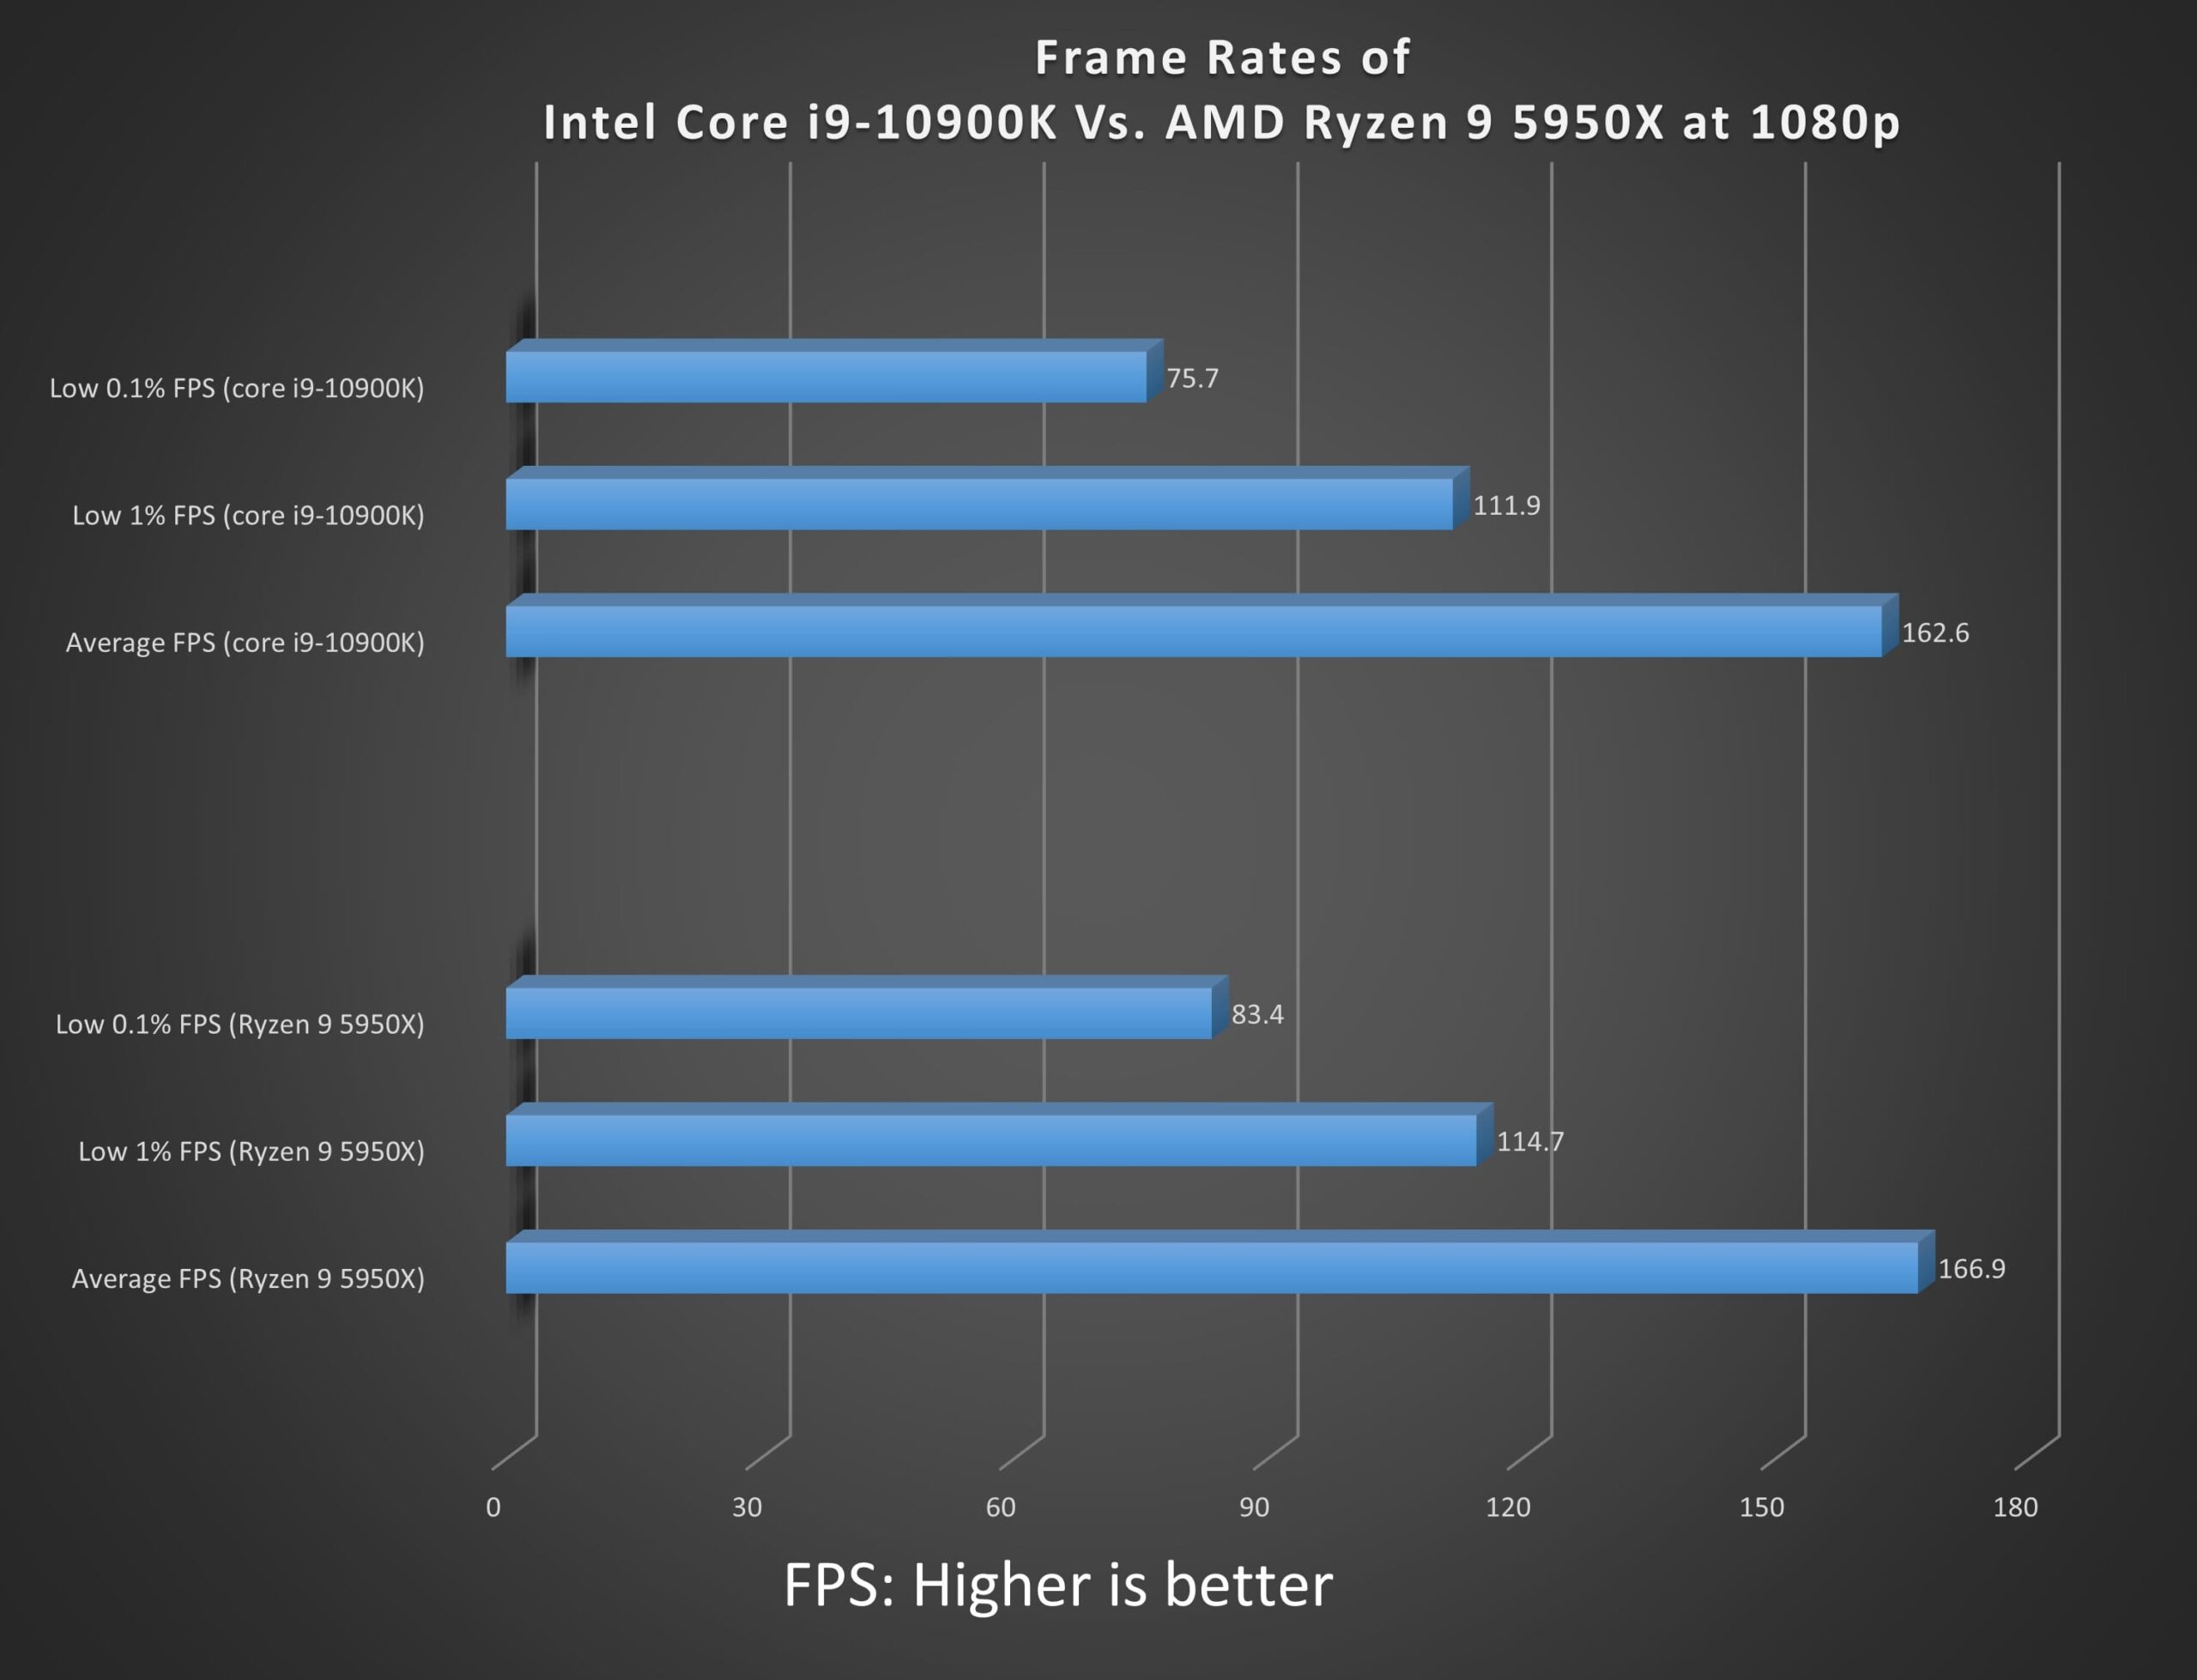 Overall gaming performance during 1080p gaming